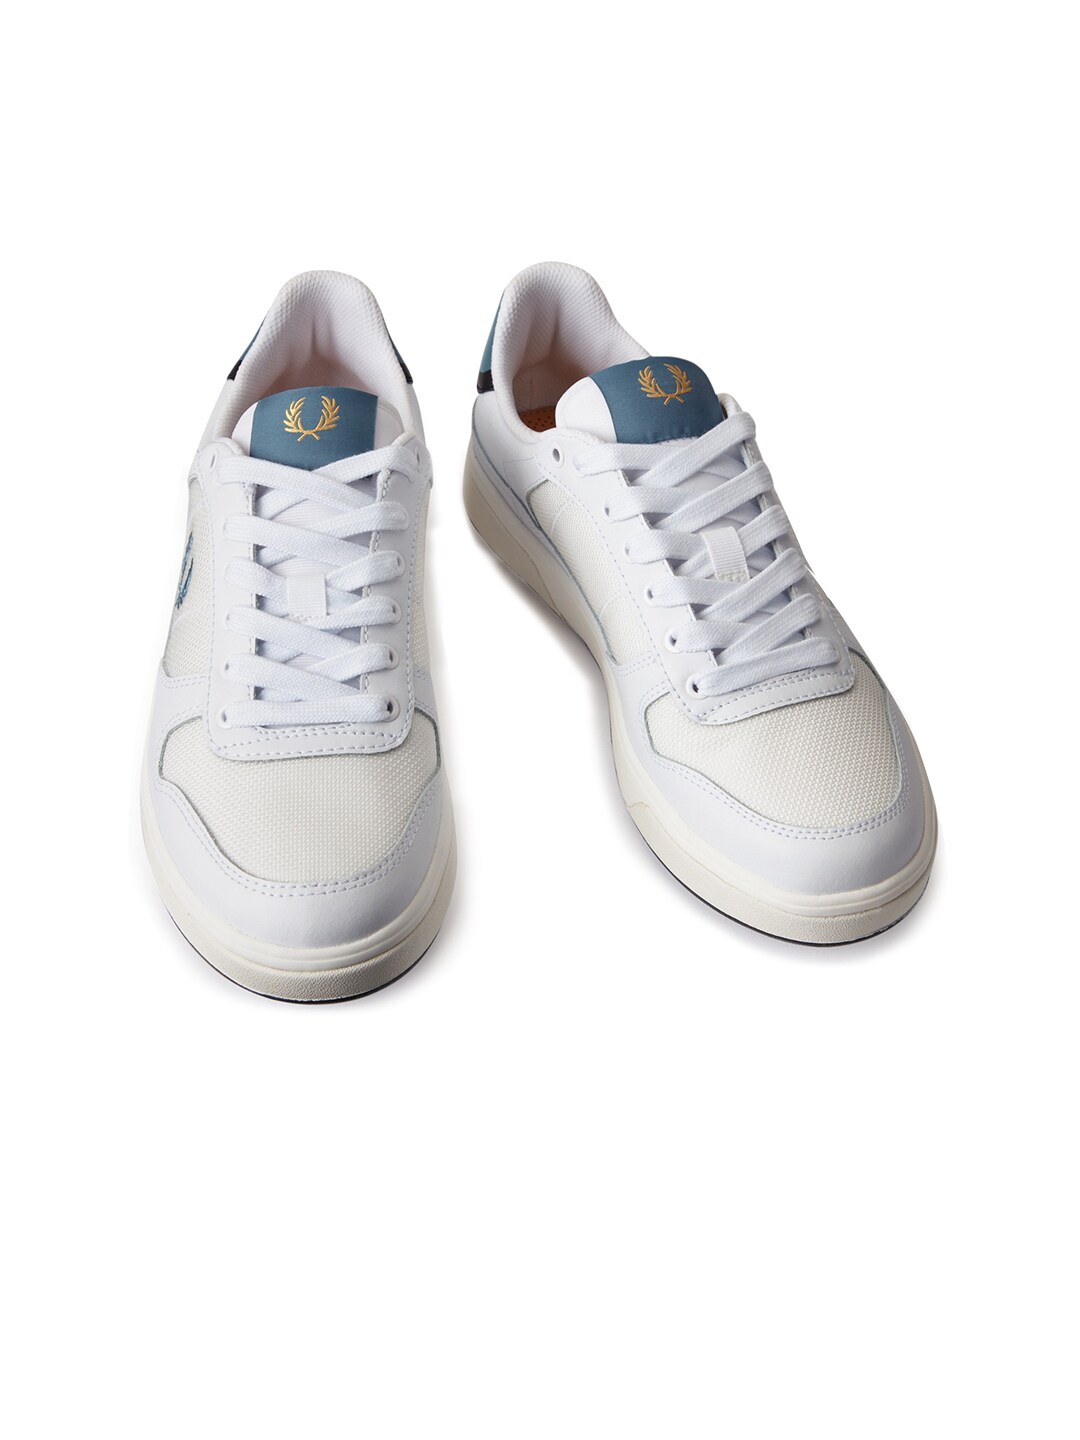 Fred Perry Women Printed Comfort Insole Sneakers Price in India